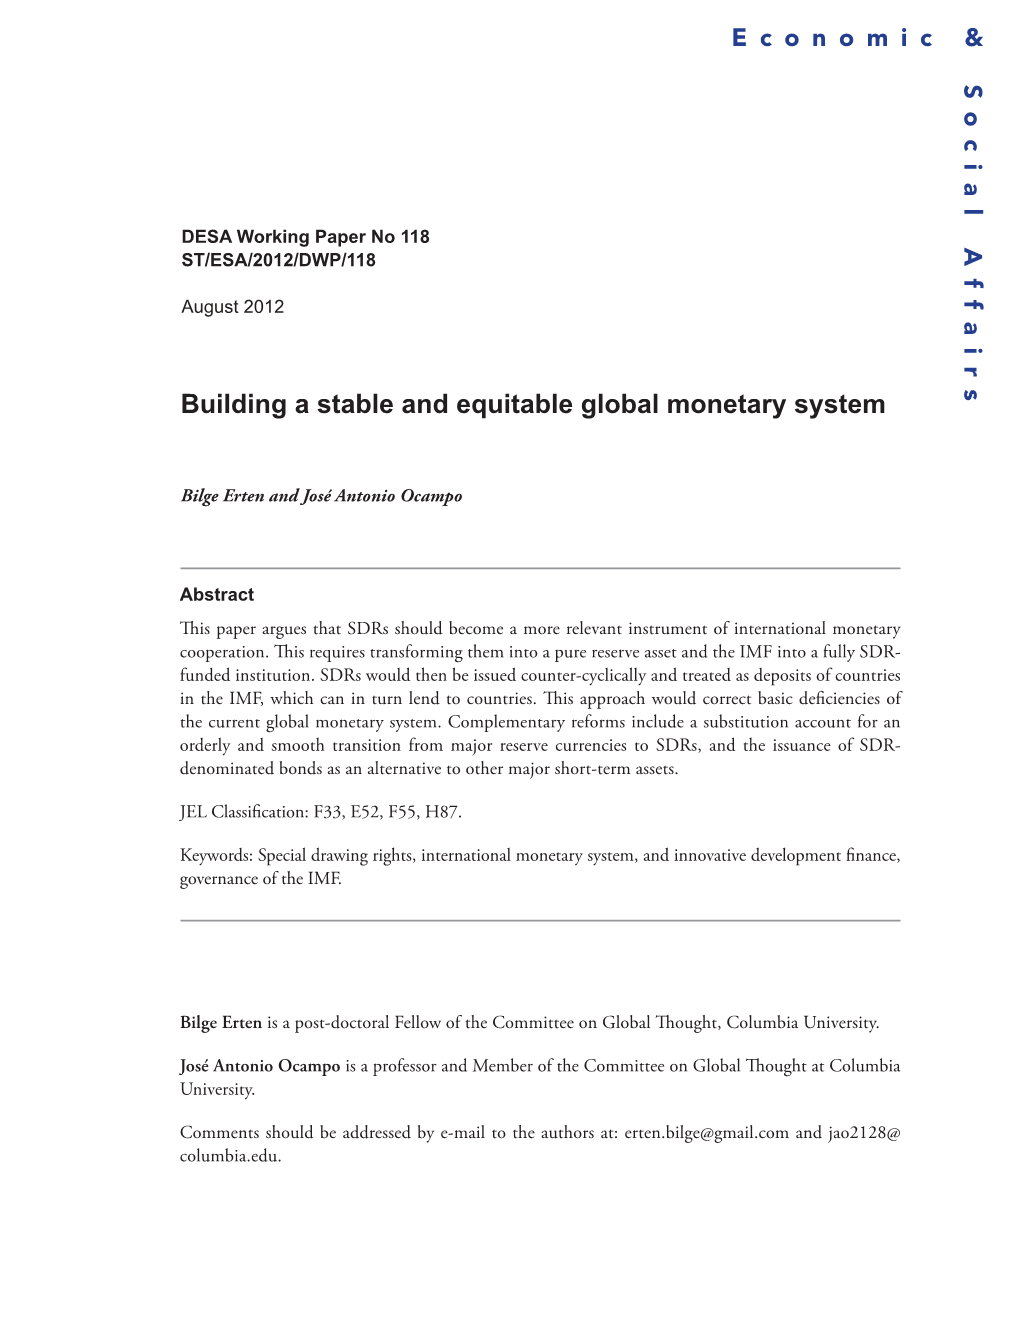 Building a Stable and Equitable Global Monetary System